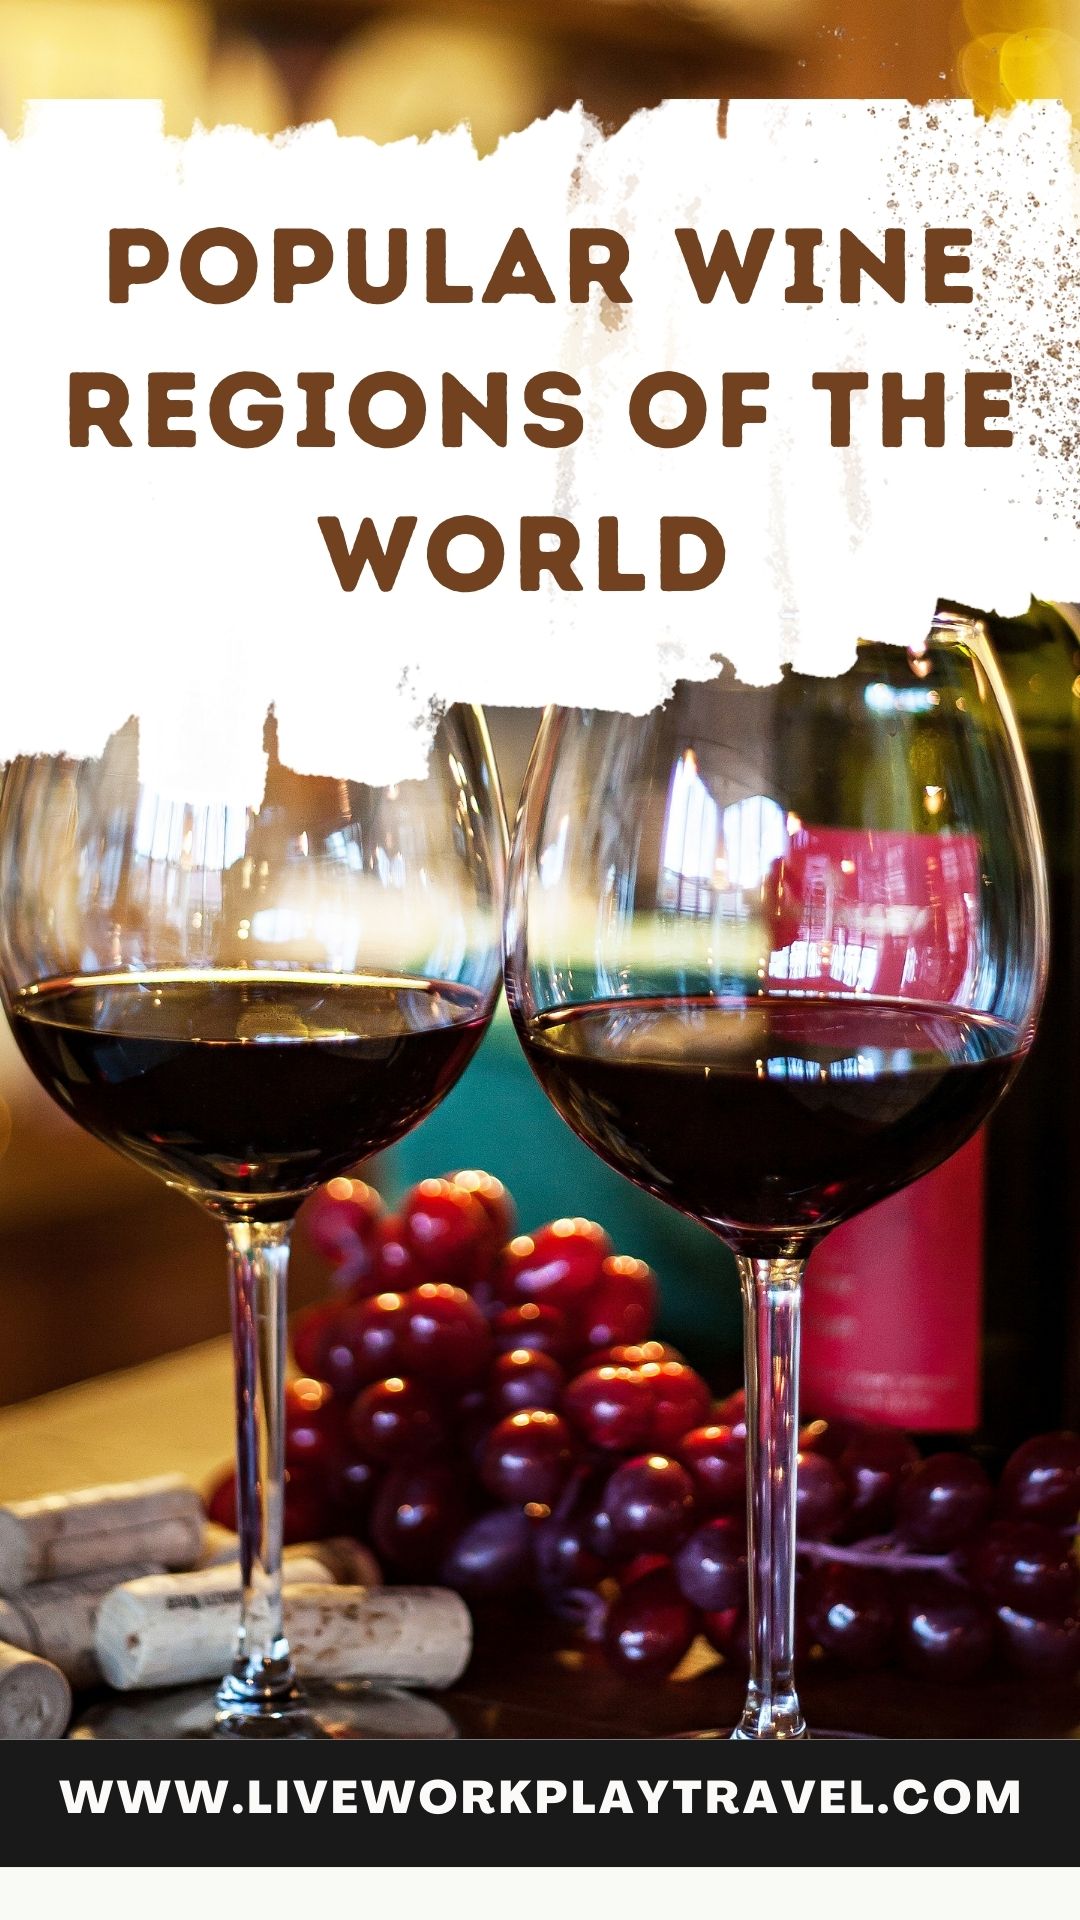 Wine-Regions-of-the-World-Glass-of-Red-Wine-Pin